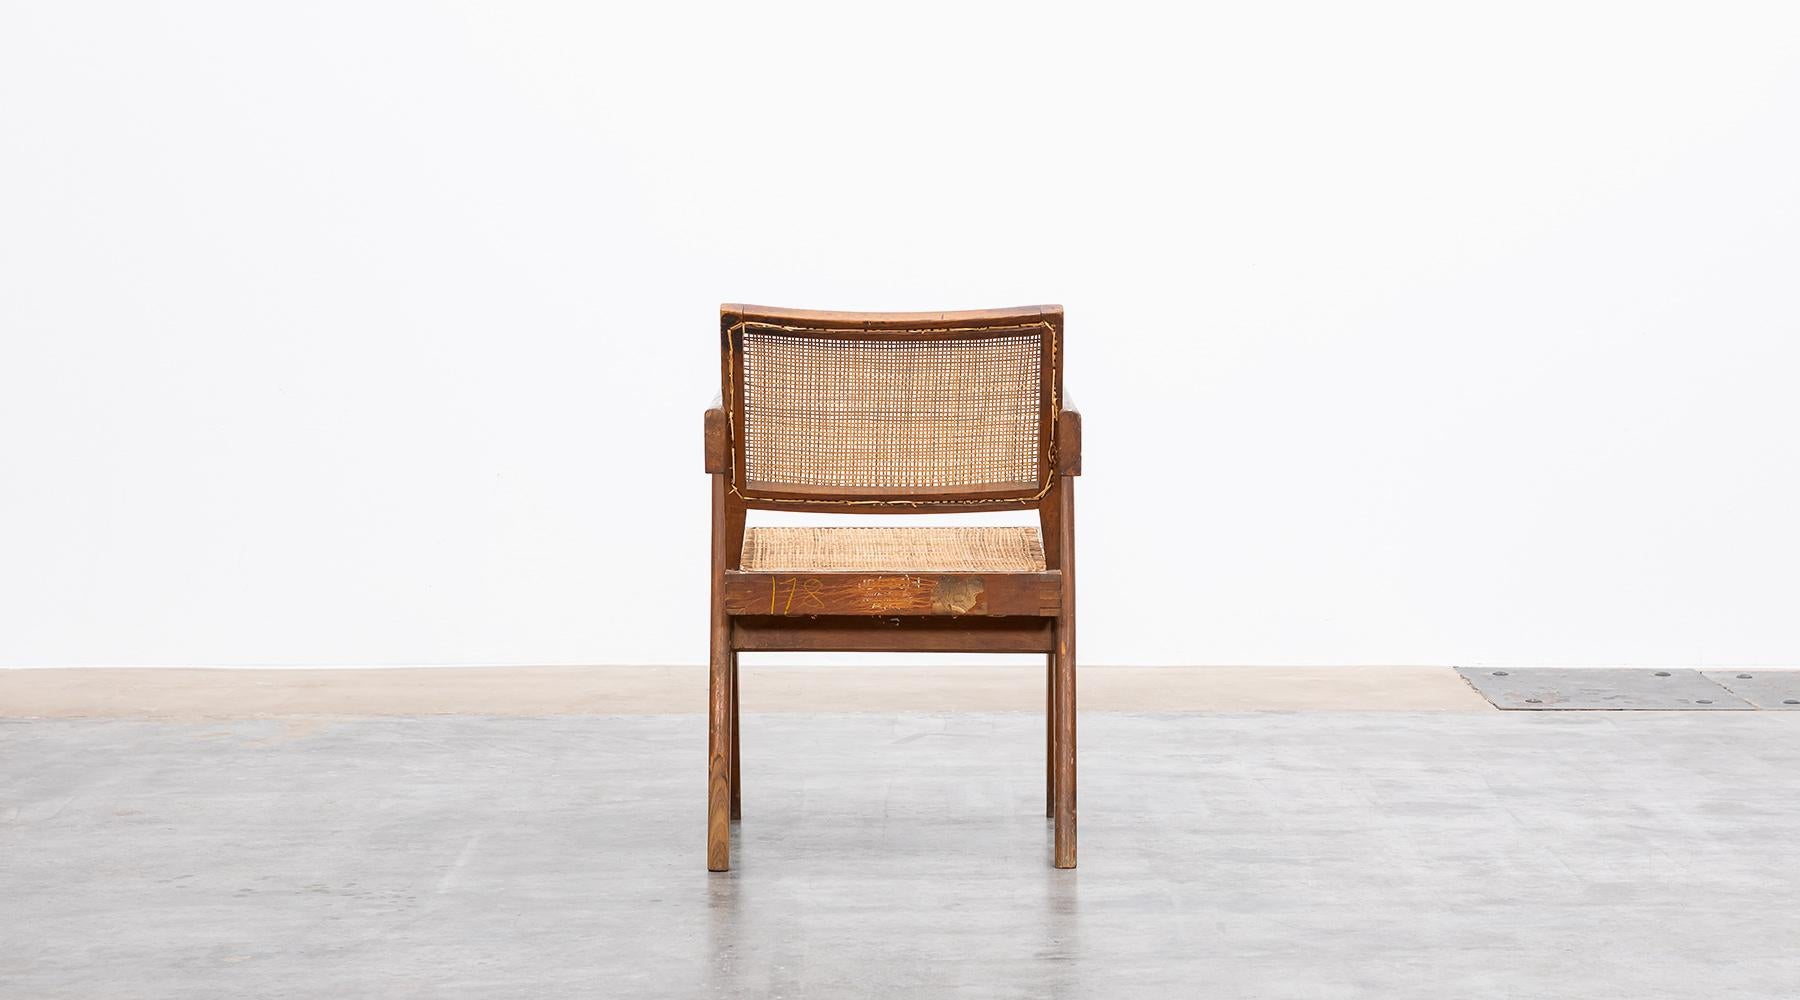 1950s Brown Wooden Teak and Cane Lounge Chair by Pierre Jeanneret 'c' For Sale 2